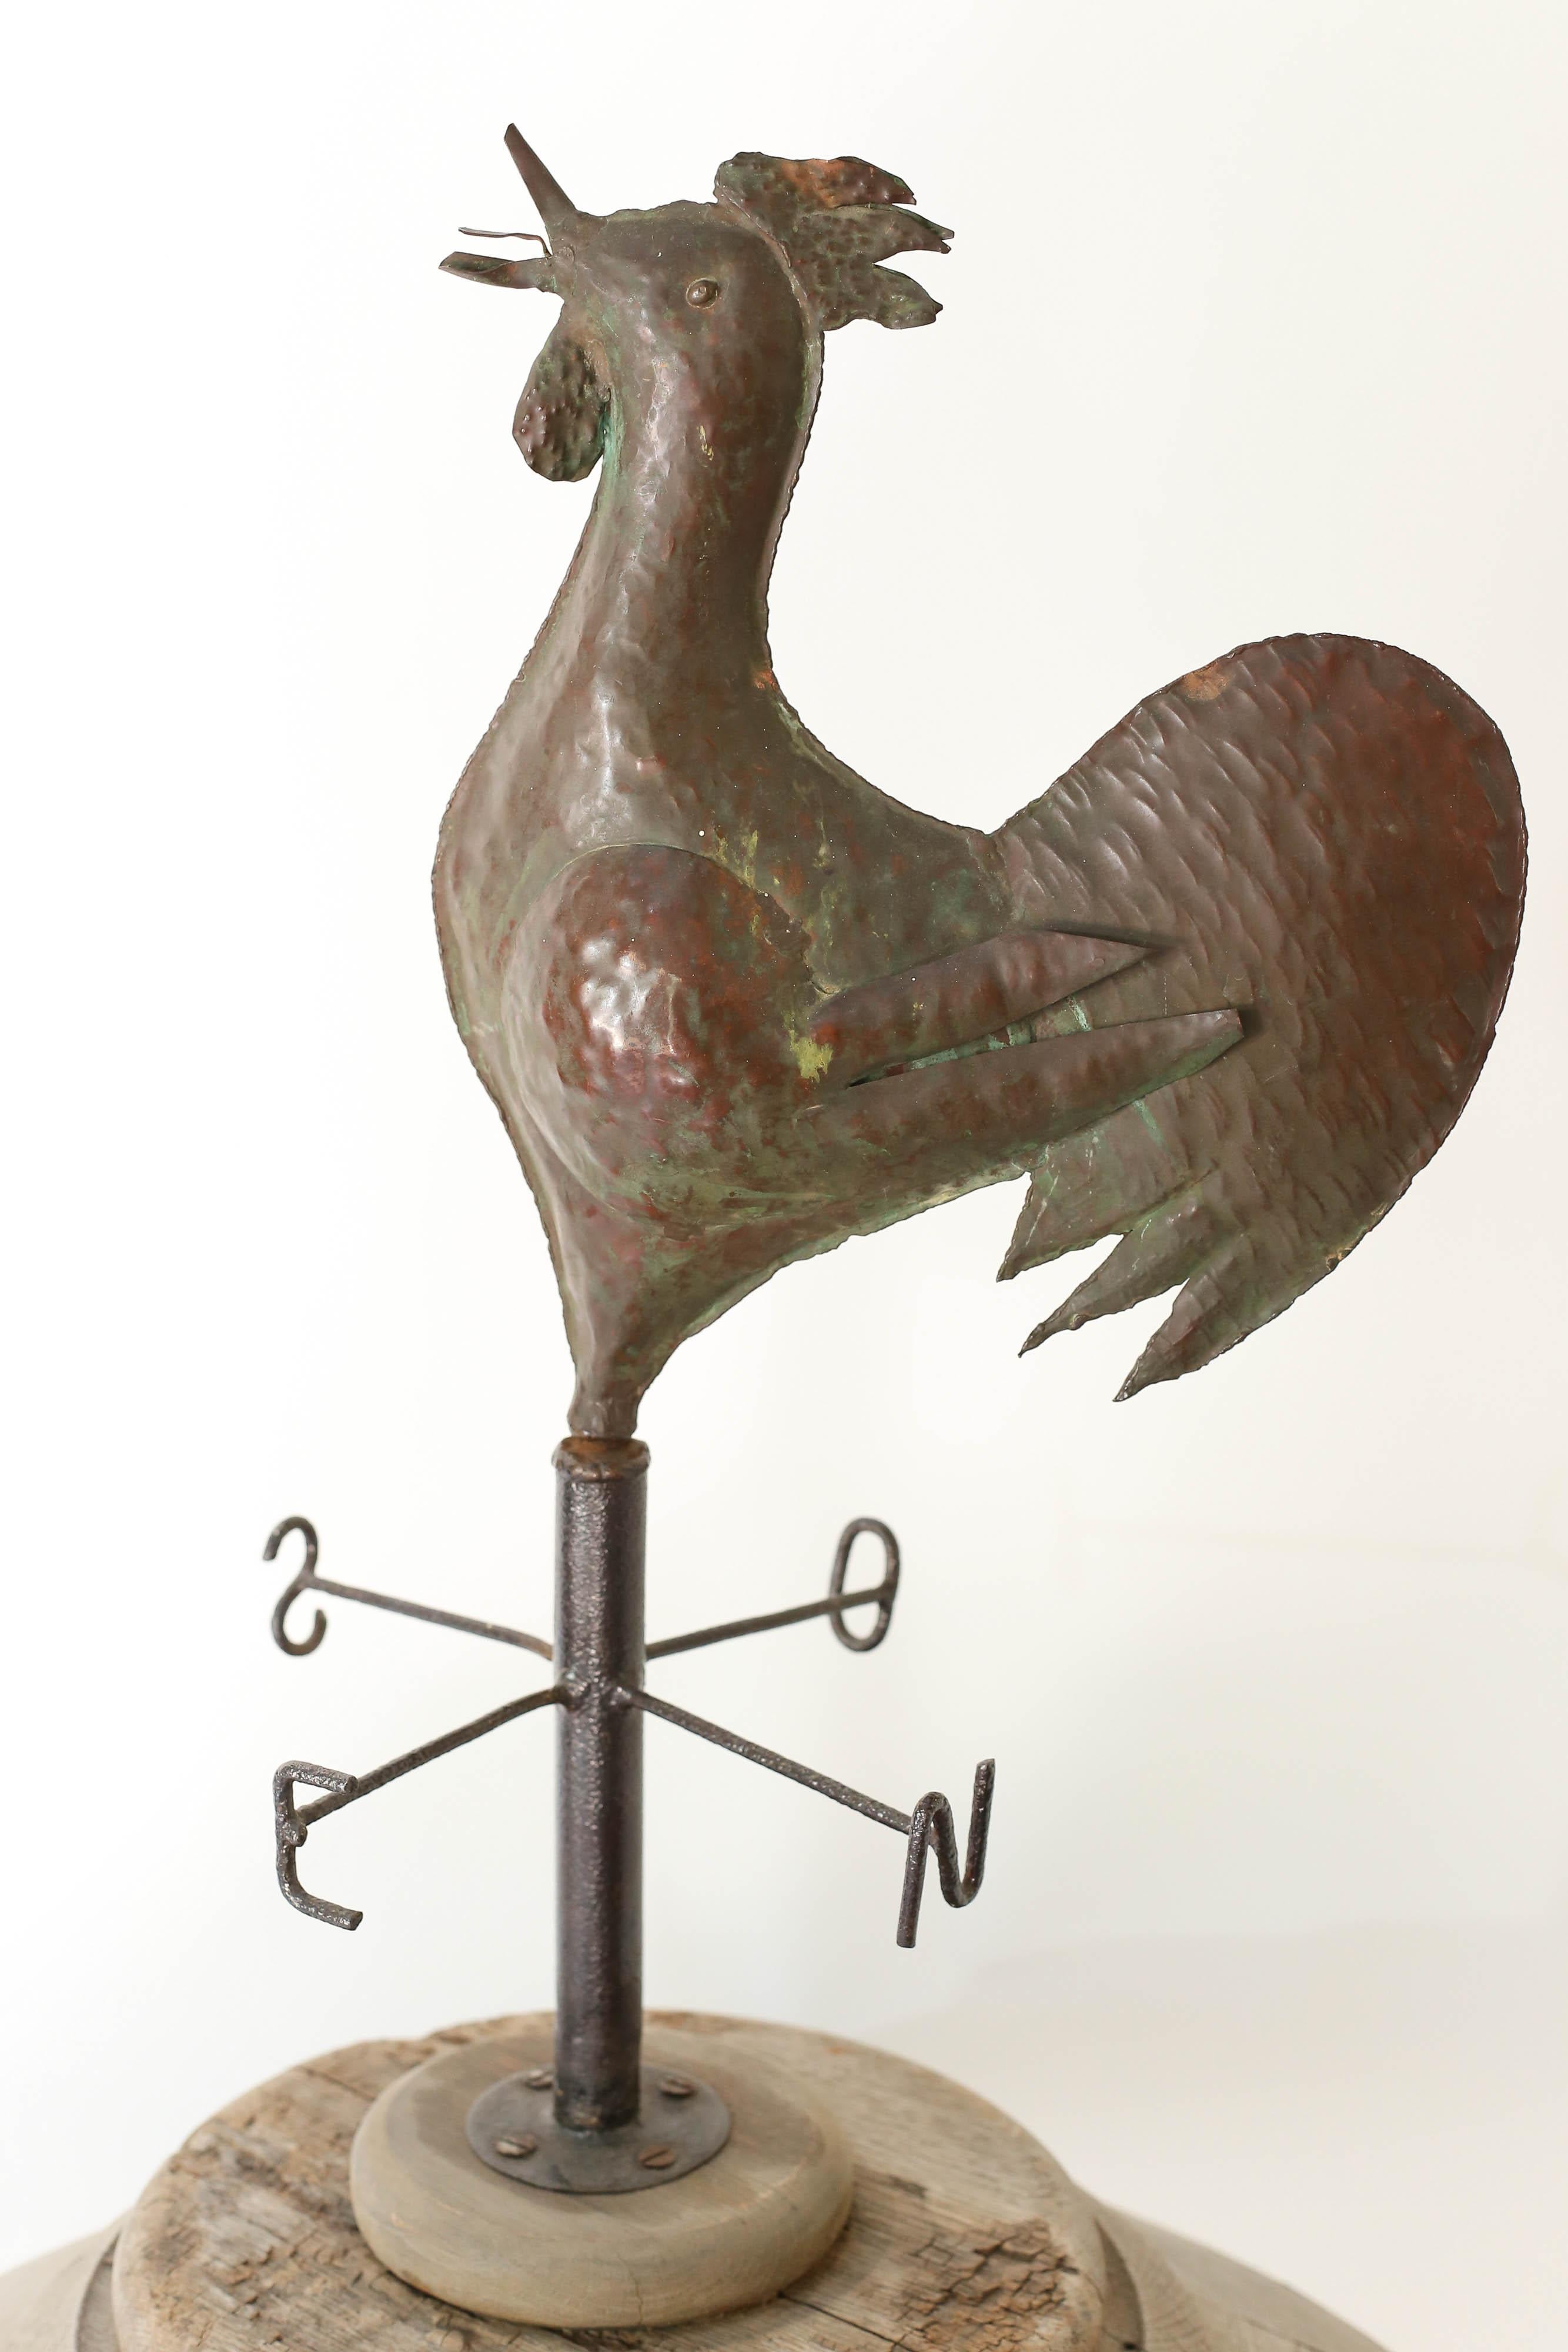 This French rooster weather vane will bring a touch of France to your home. Usually found in France above homes or barns this metal and iron weather vane has the directional letters of the French alphabet, N (nord = north) S (sud = south) E (est +